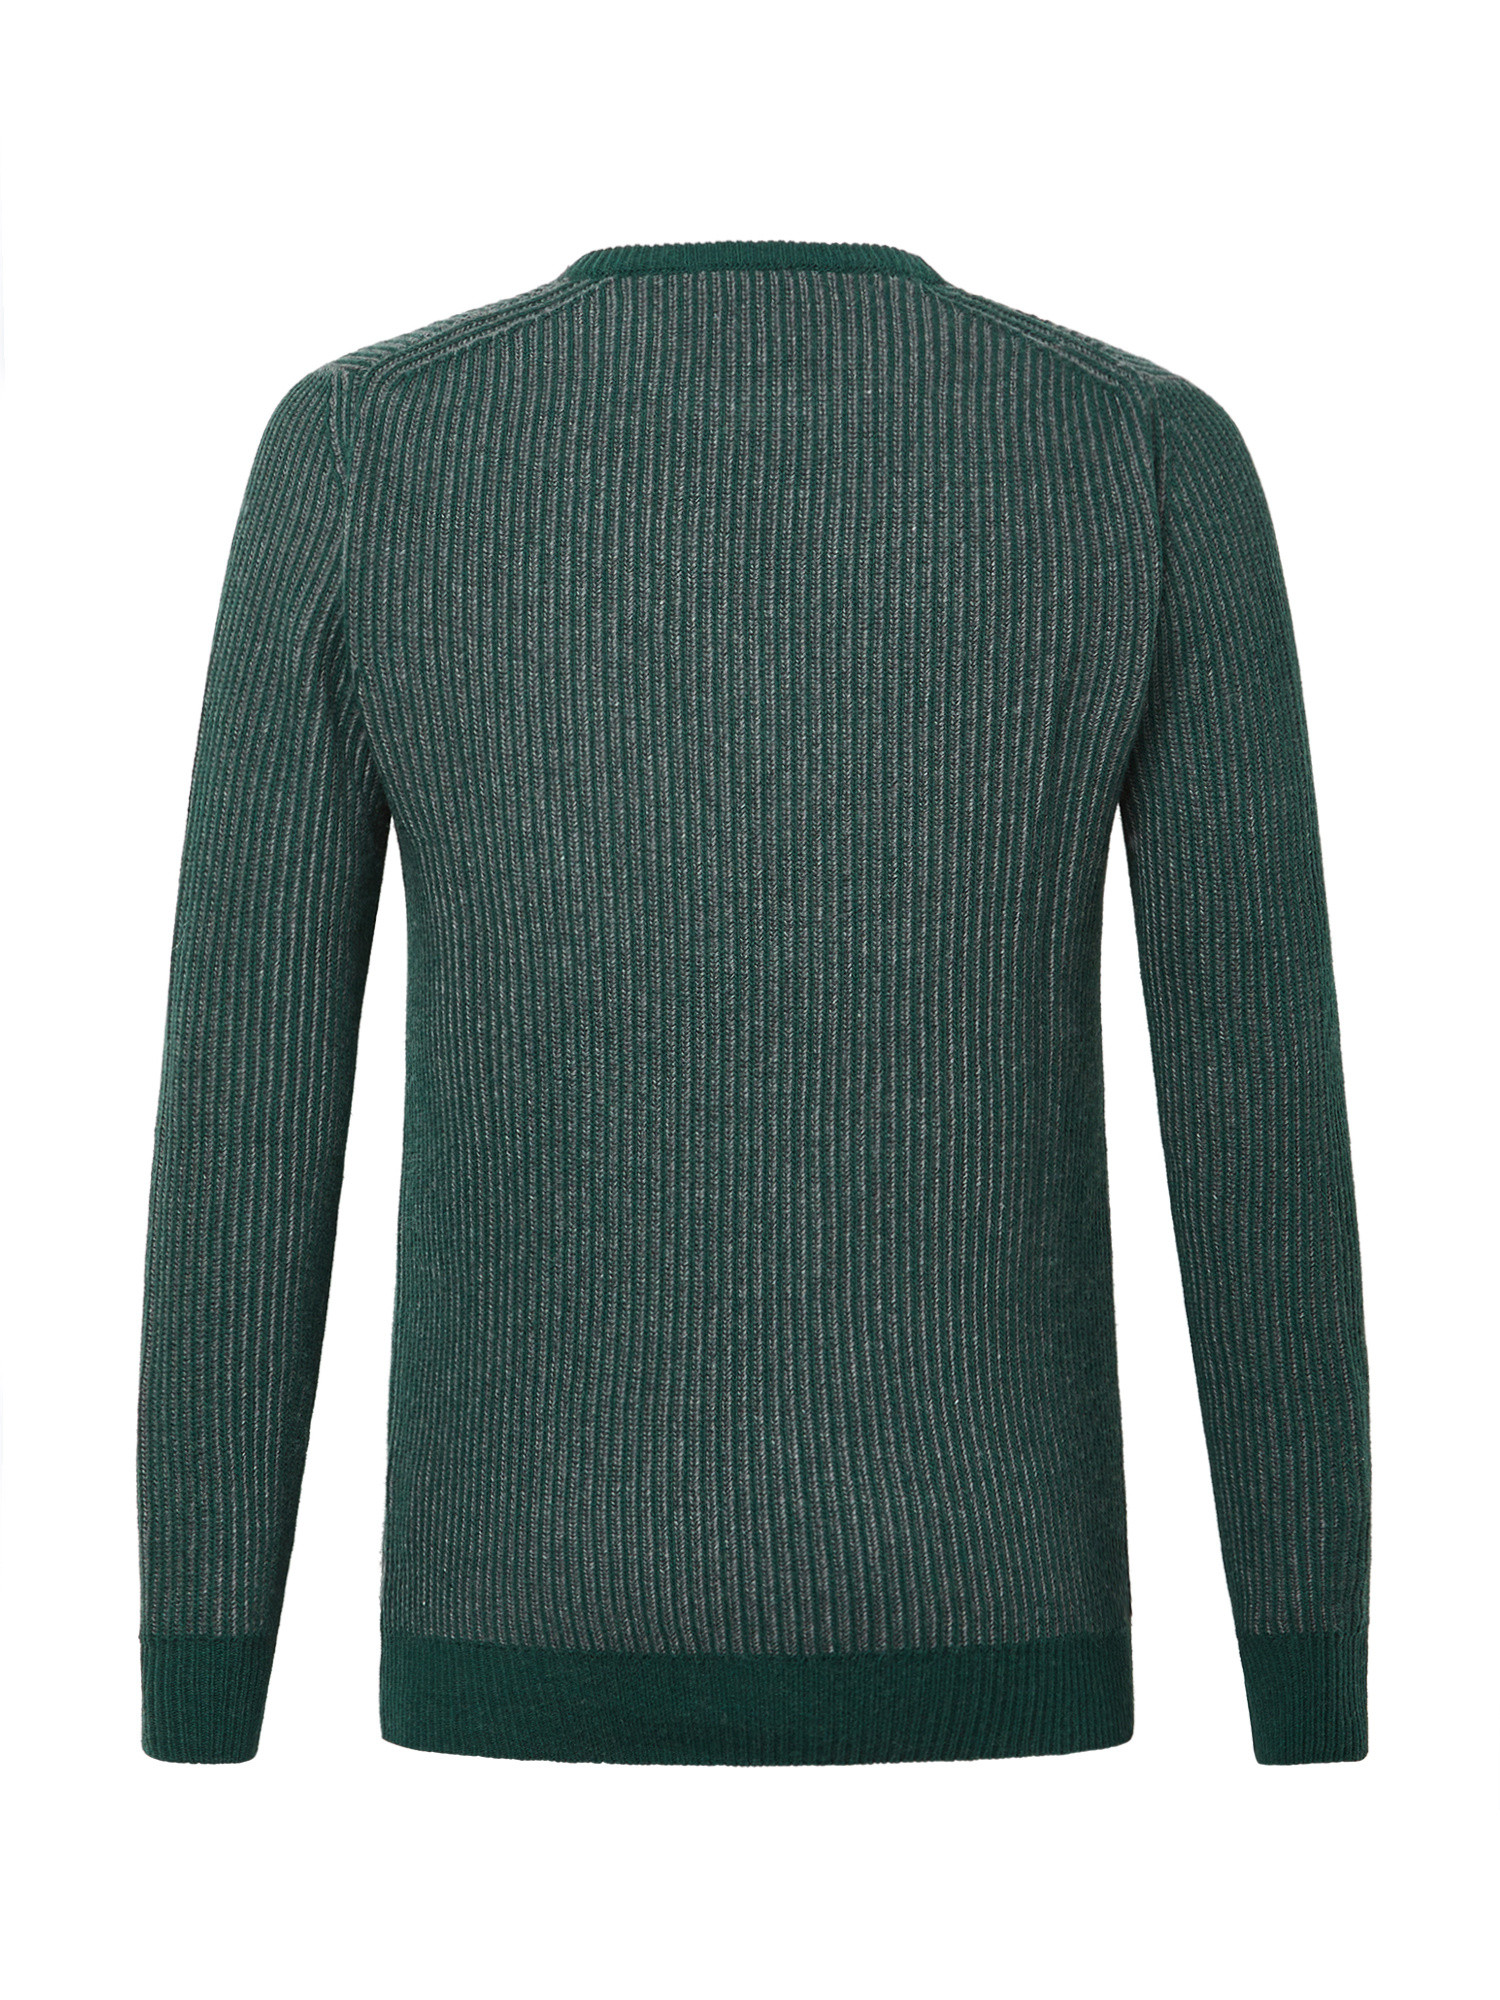 Luca D'Altieri - Cashmere blend crew neck sweater with noble fibres, Green, large image number 1